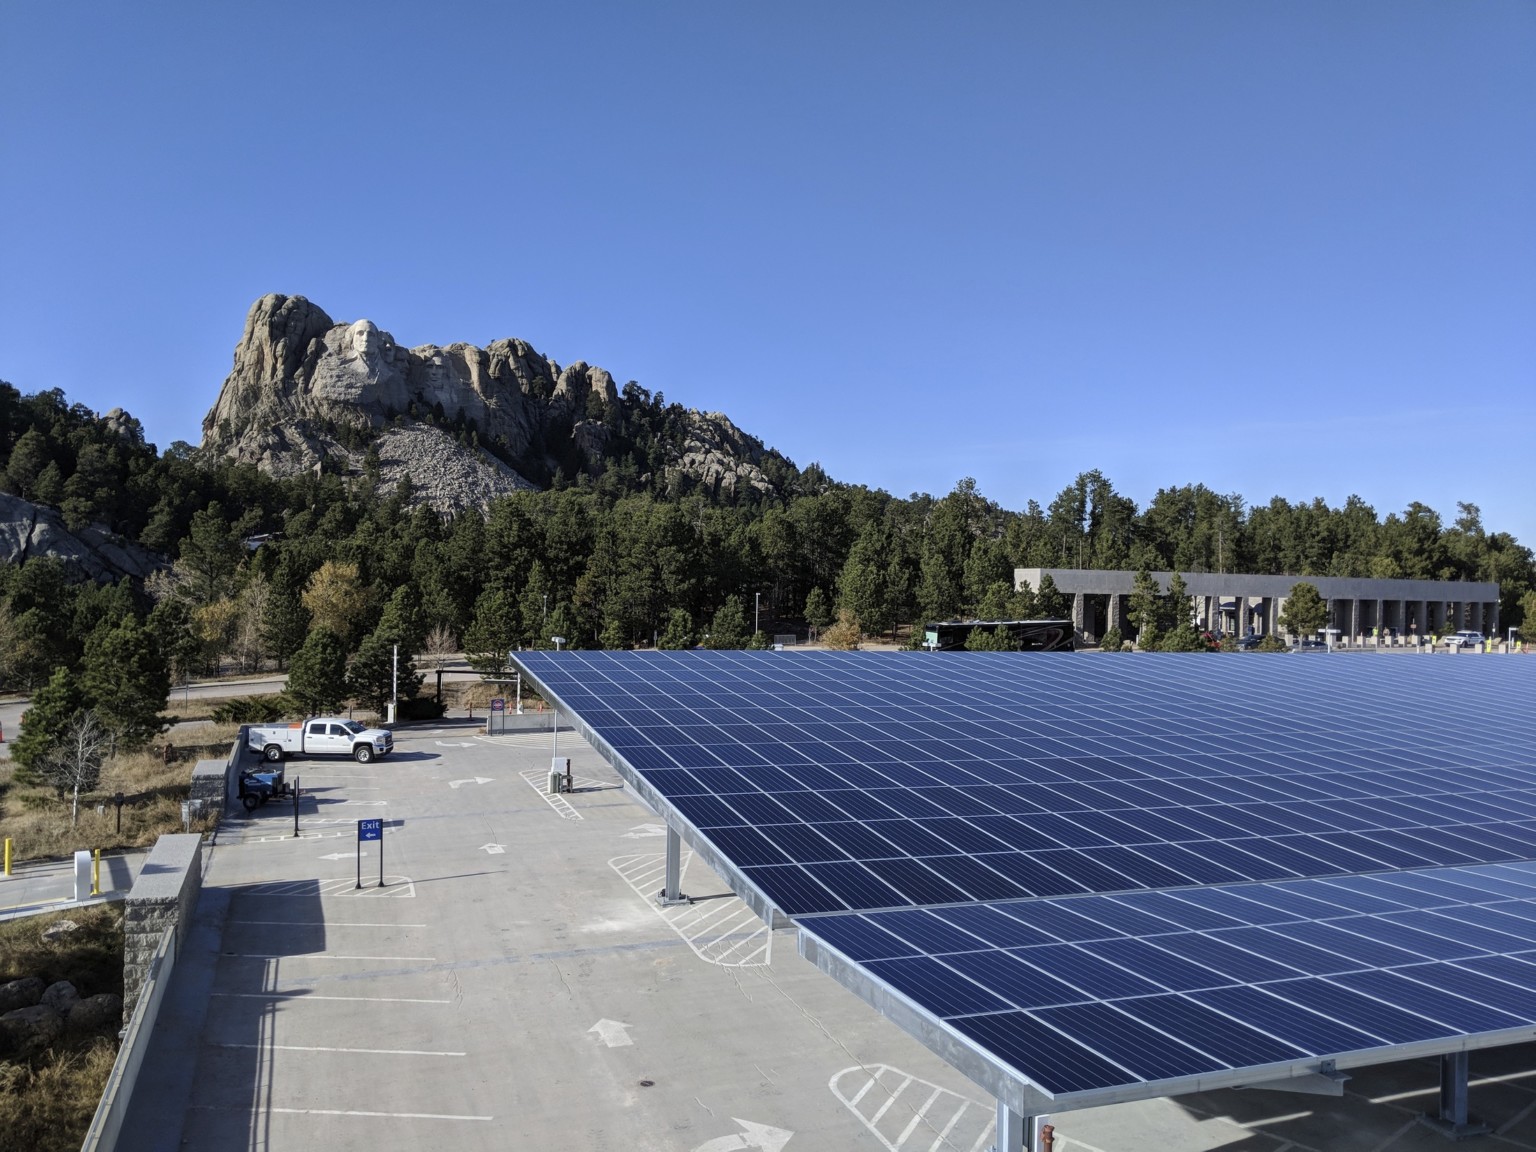 Solar canopy in parking lot in front of Mount Rushmore with trees in between